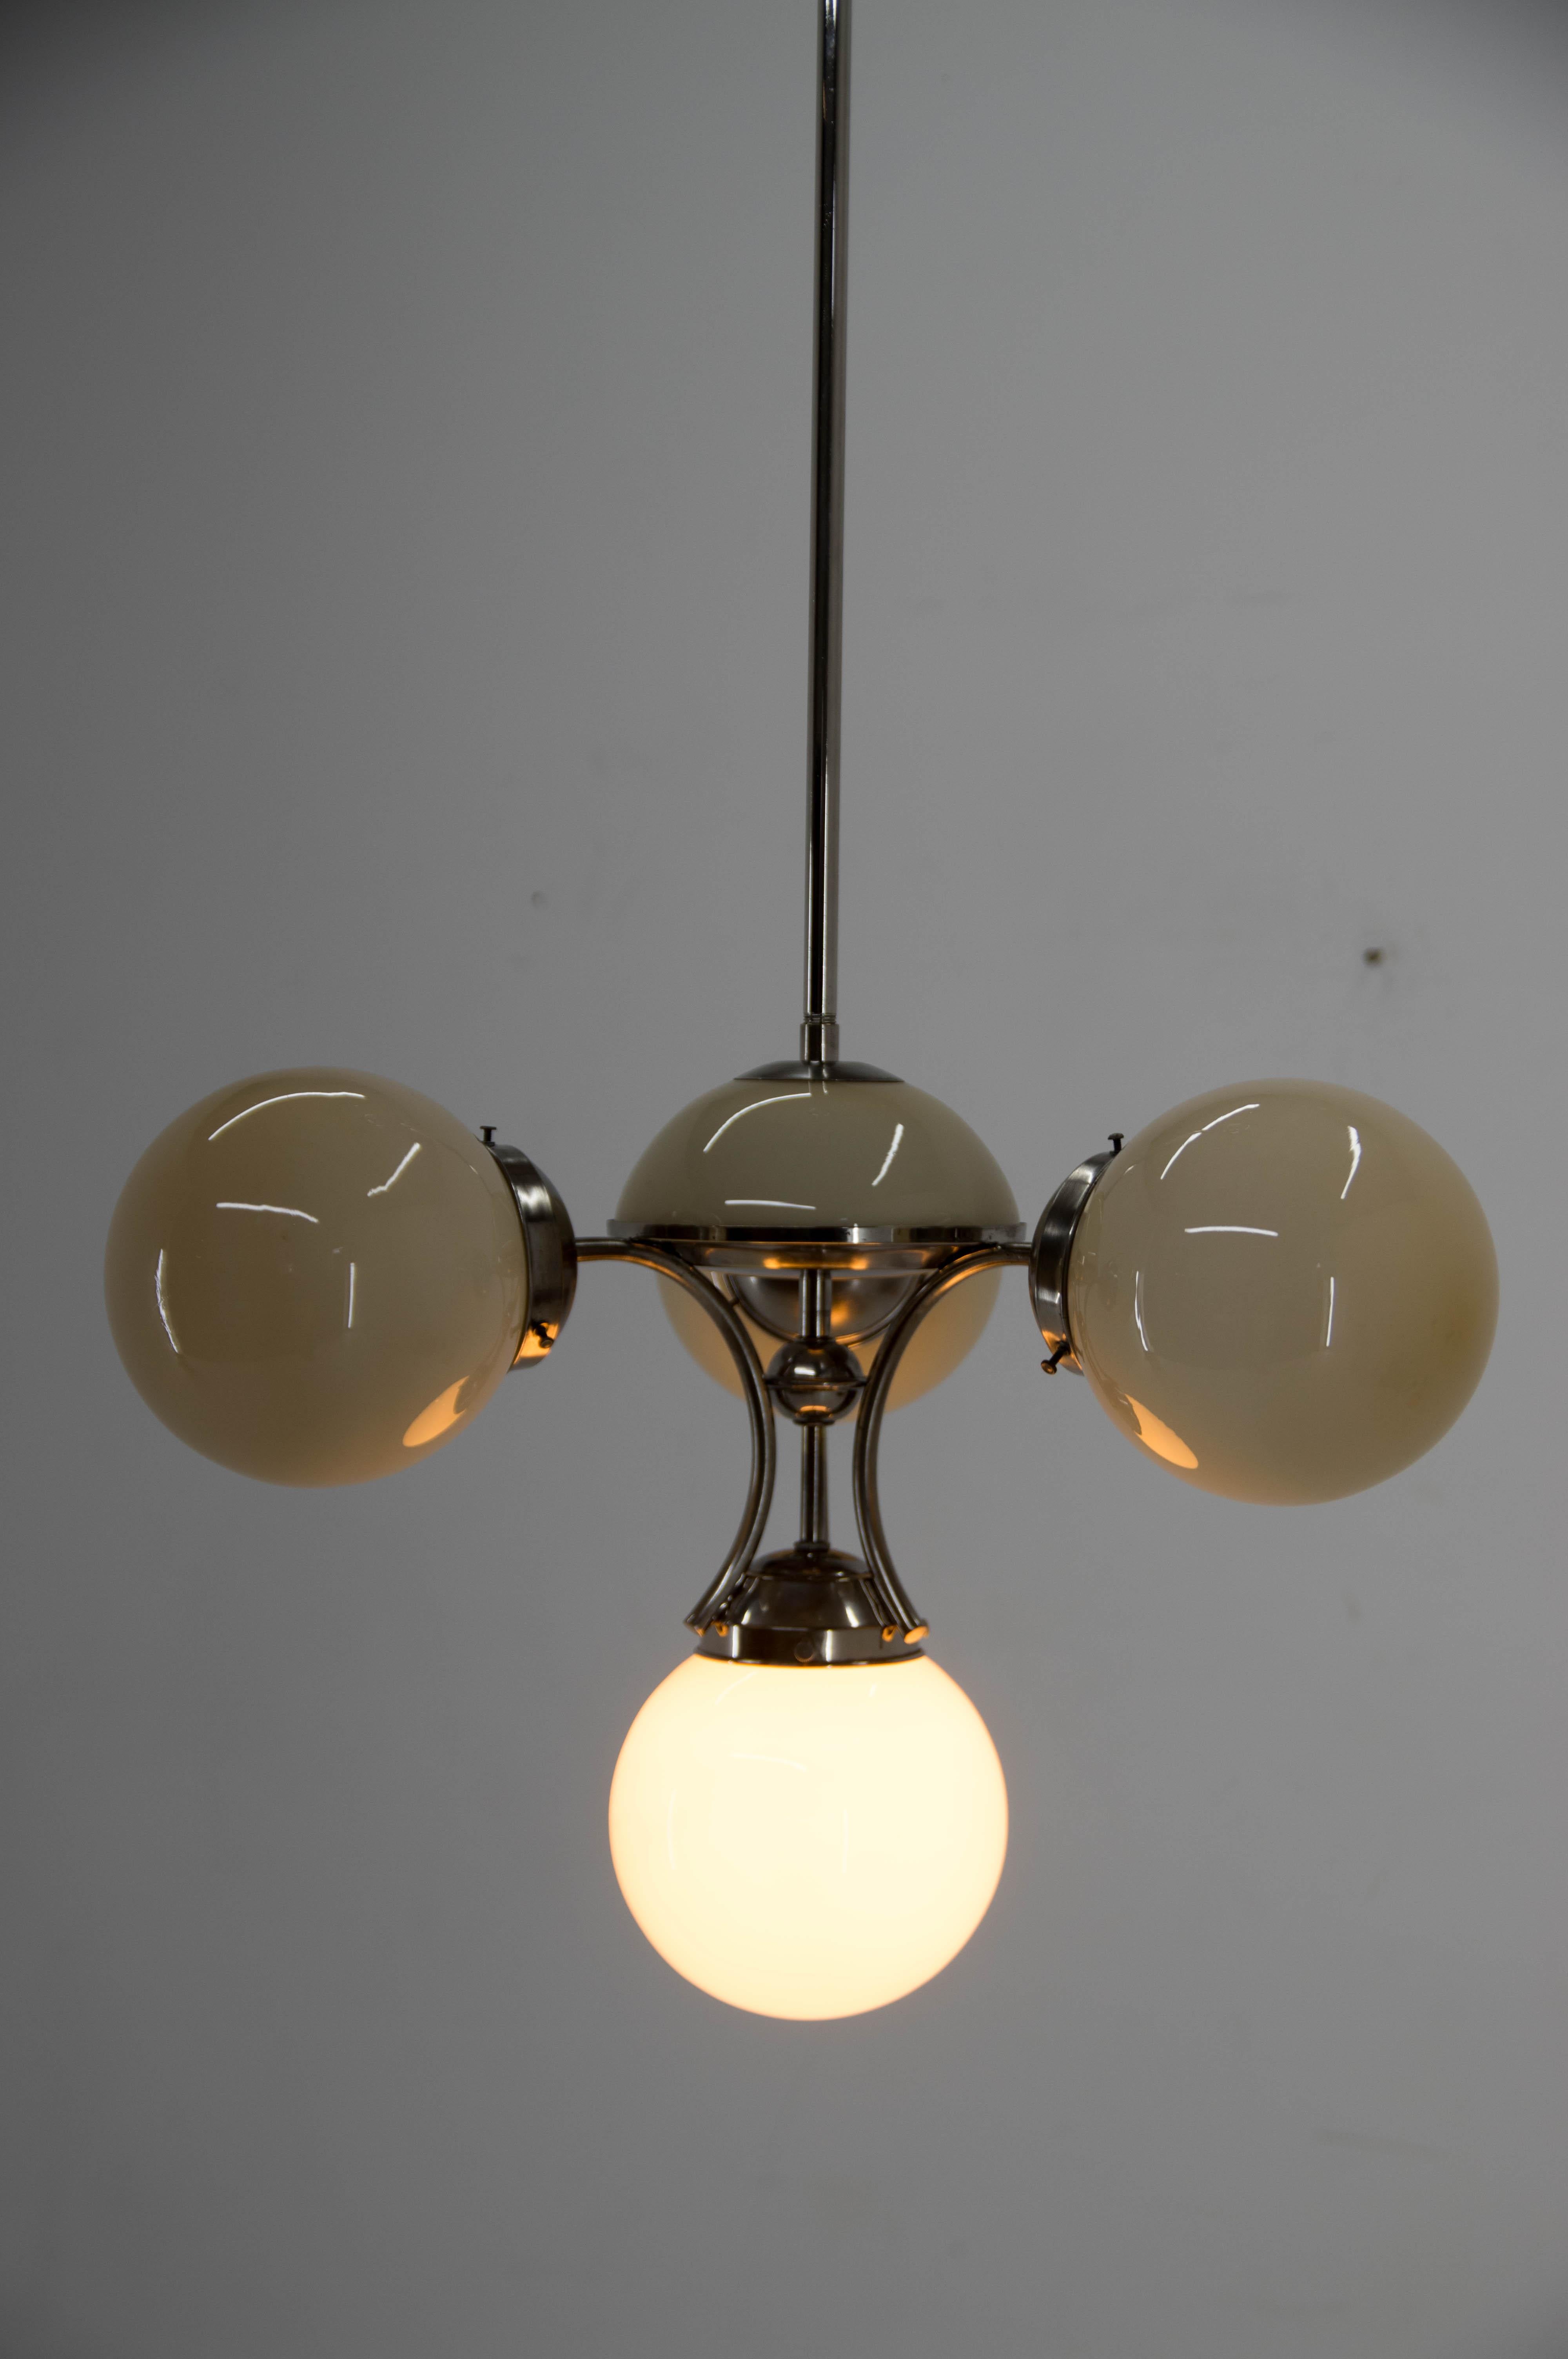 Unique Art Deco Nickel and Glass Chandelier, 1930s For Sale 7